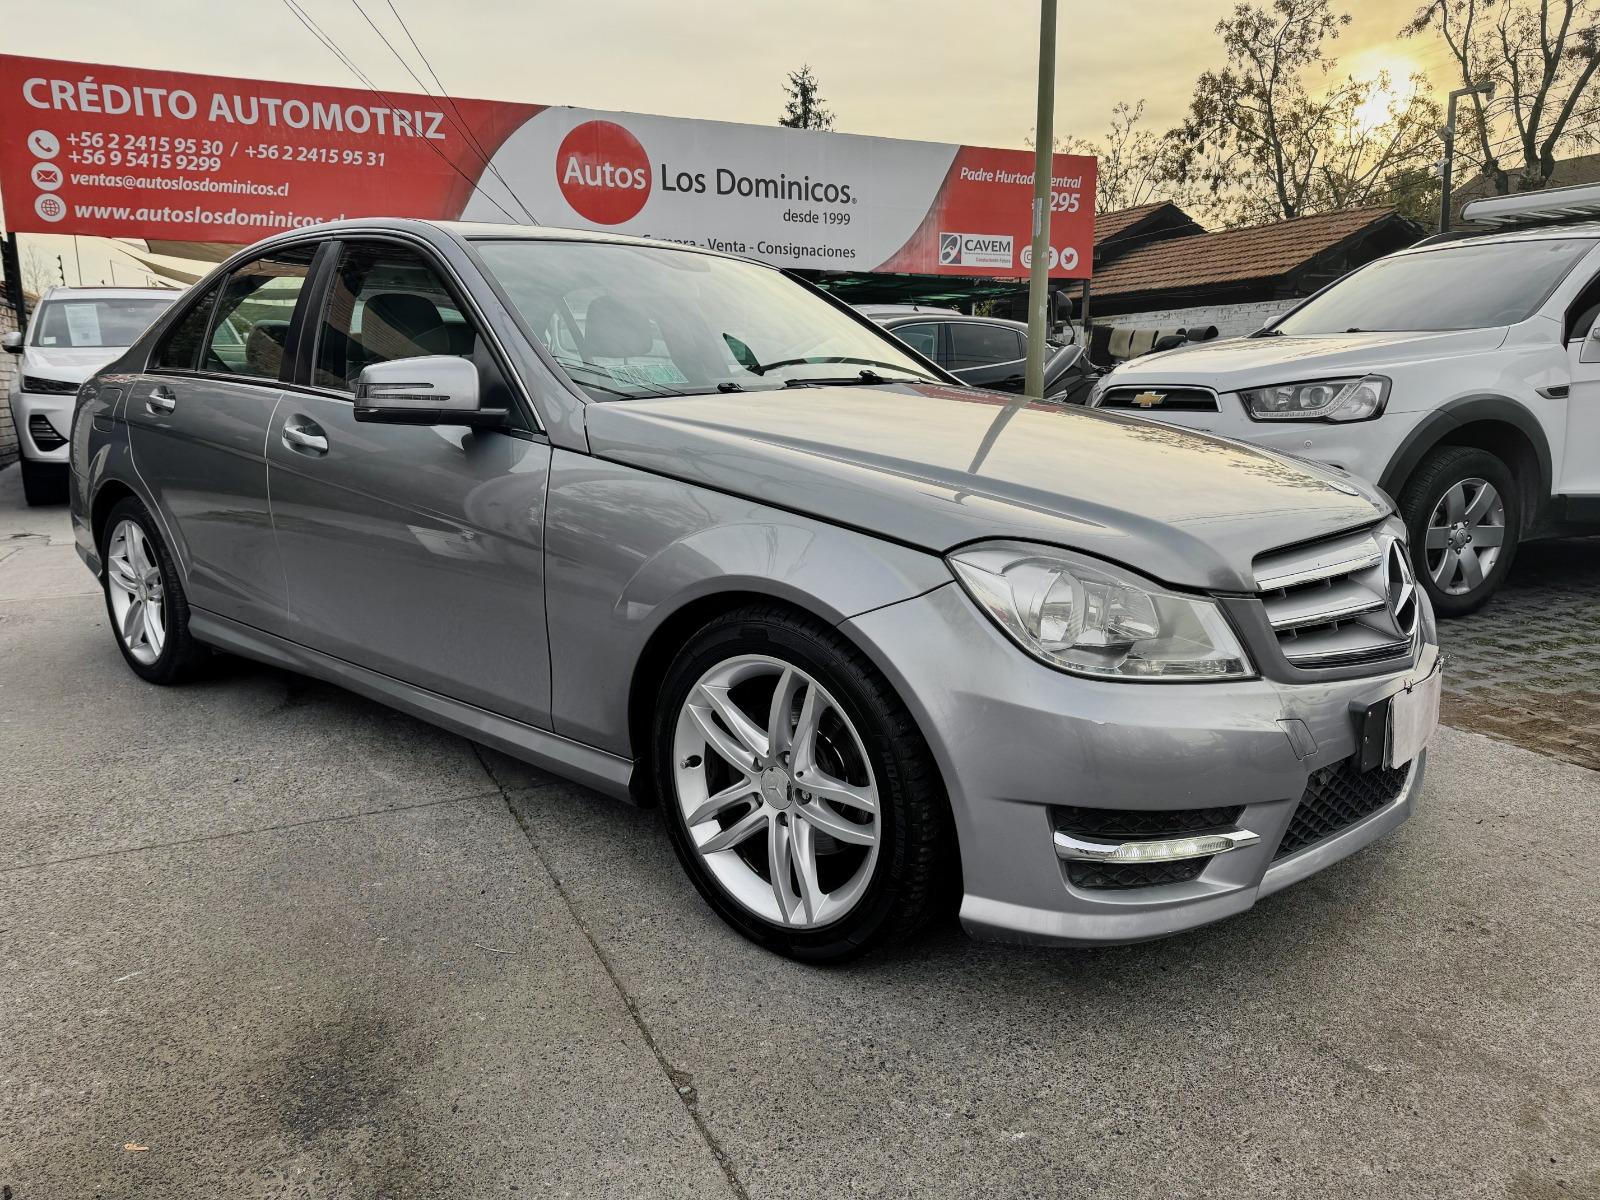 MERCEDES-BENZ C180 CGI 1.8 AUTOMATICO 2014 FULL AIRE AIRBAG ABS - 